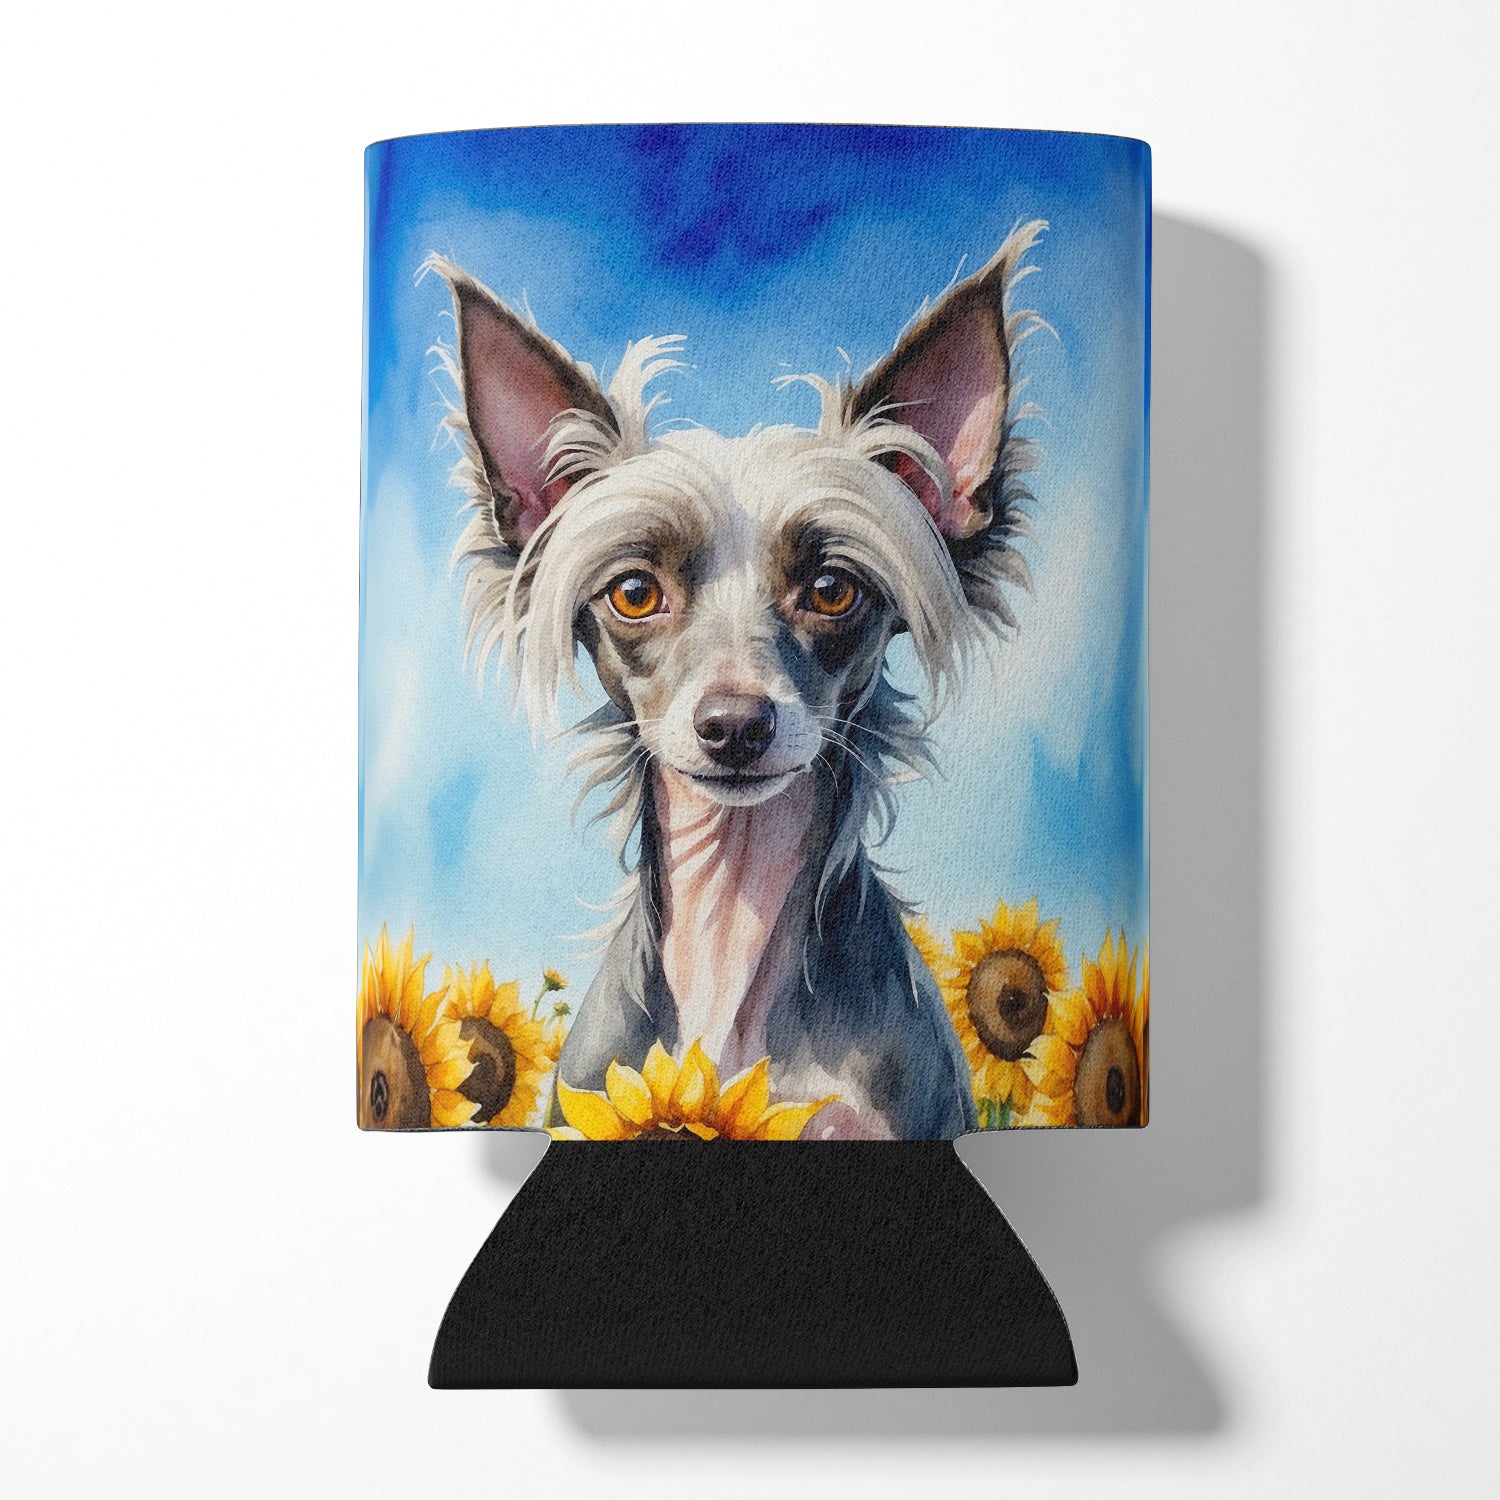 Buy this Chinese Crested in Sunflowers Can or Bottle Hugger